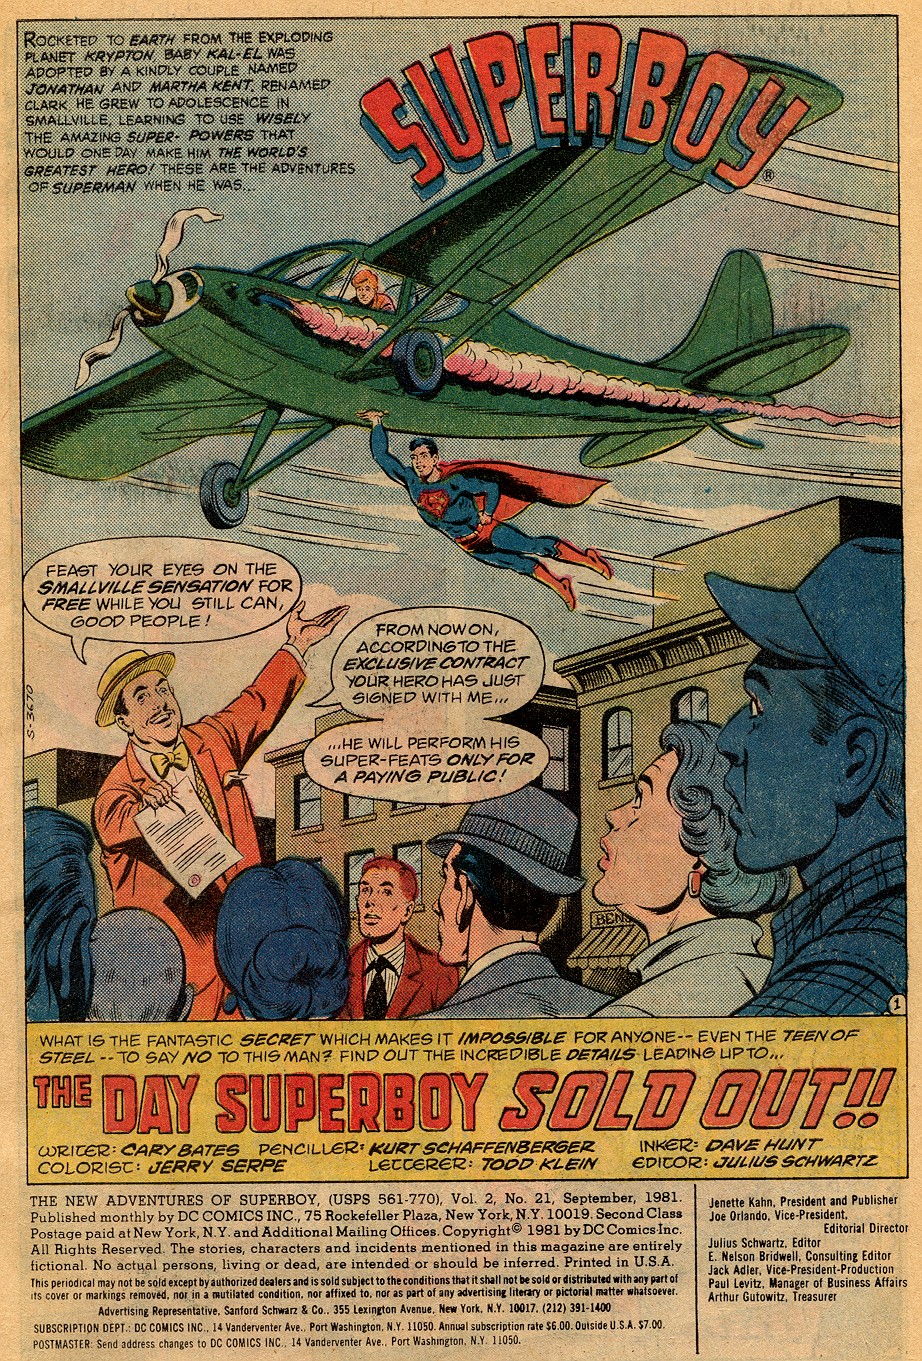 The New Adventures of Superboy 21 Page 2